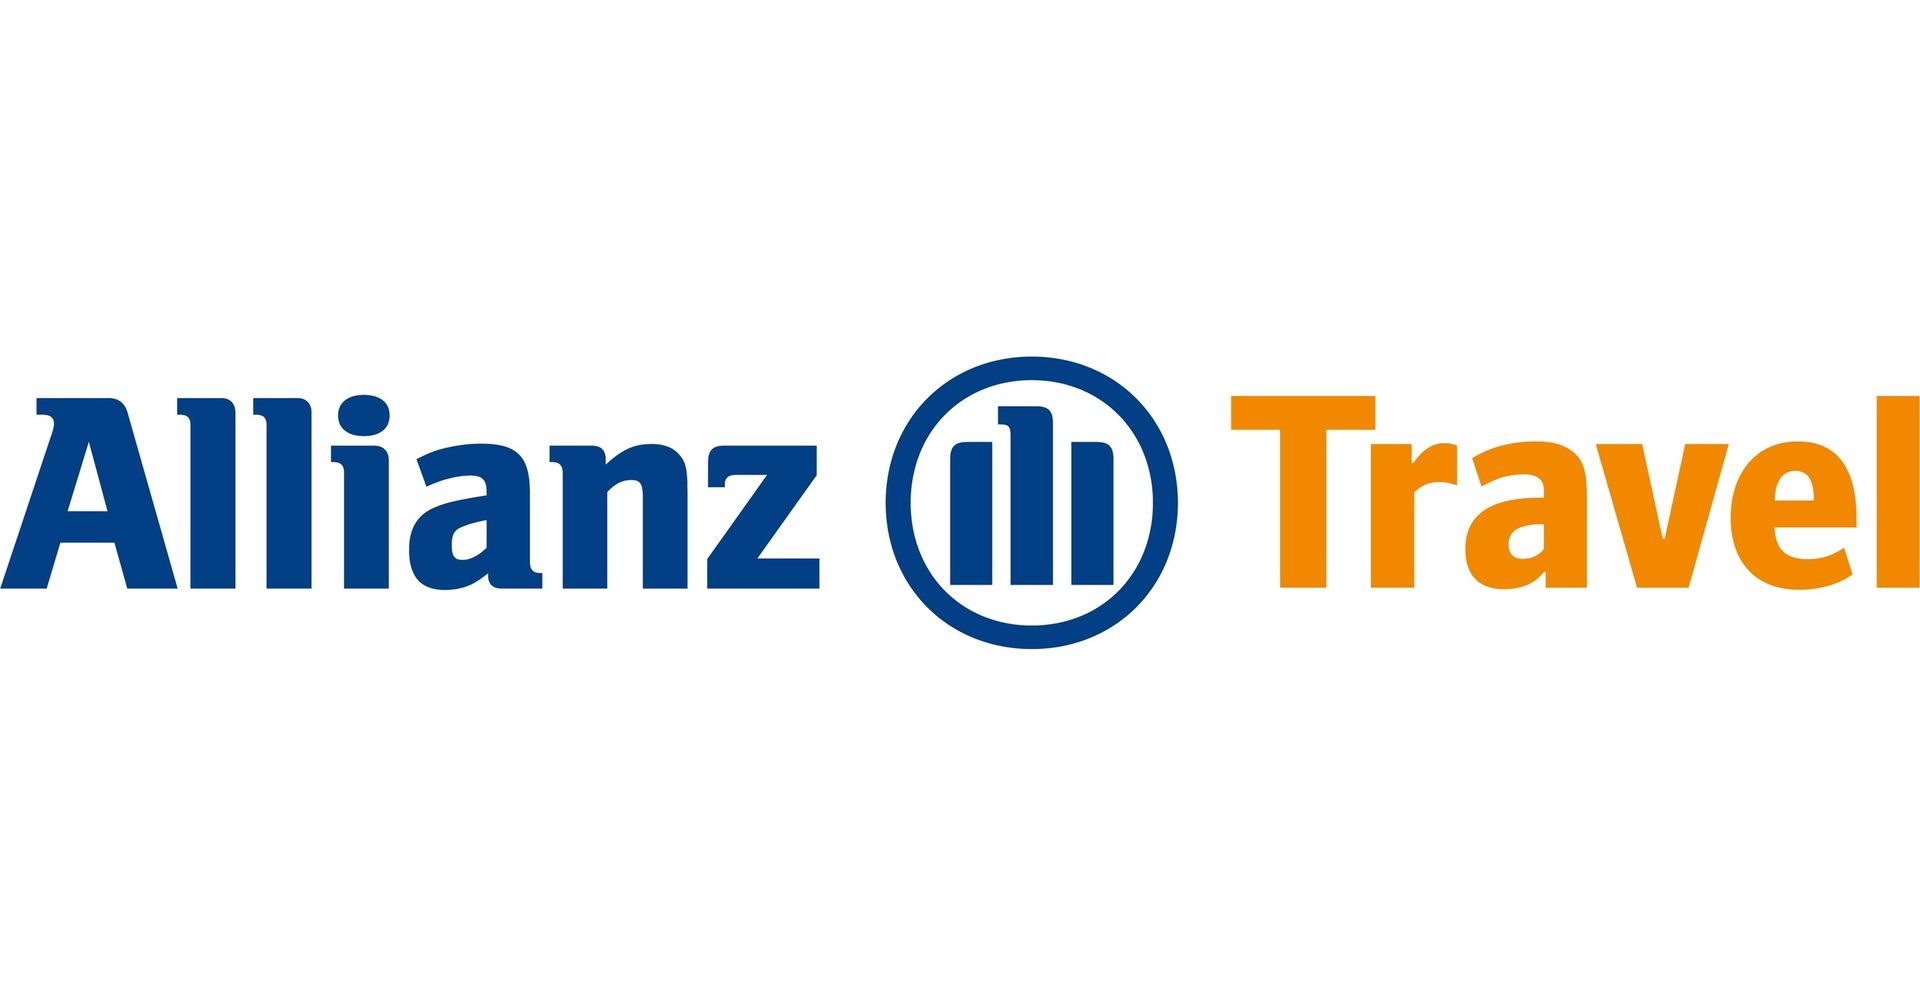 The allianz travel logo is blue and orange on a white background.